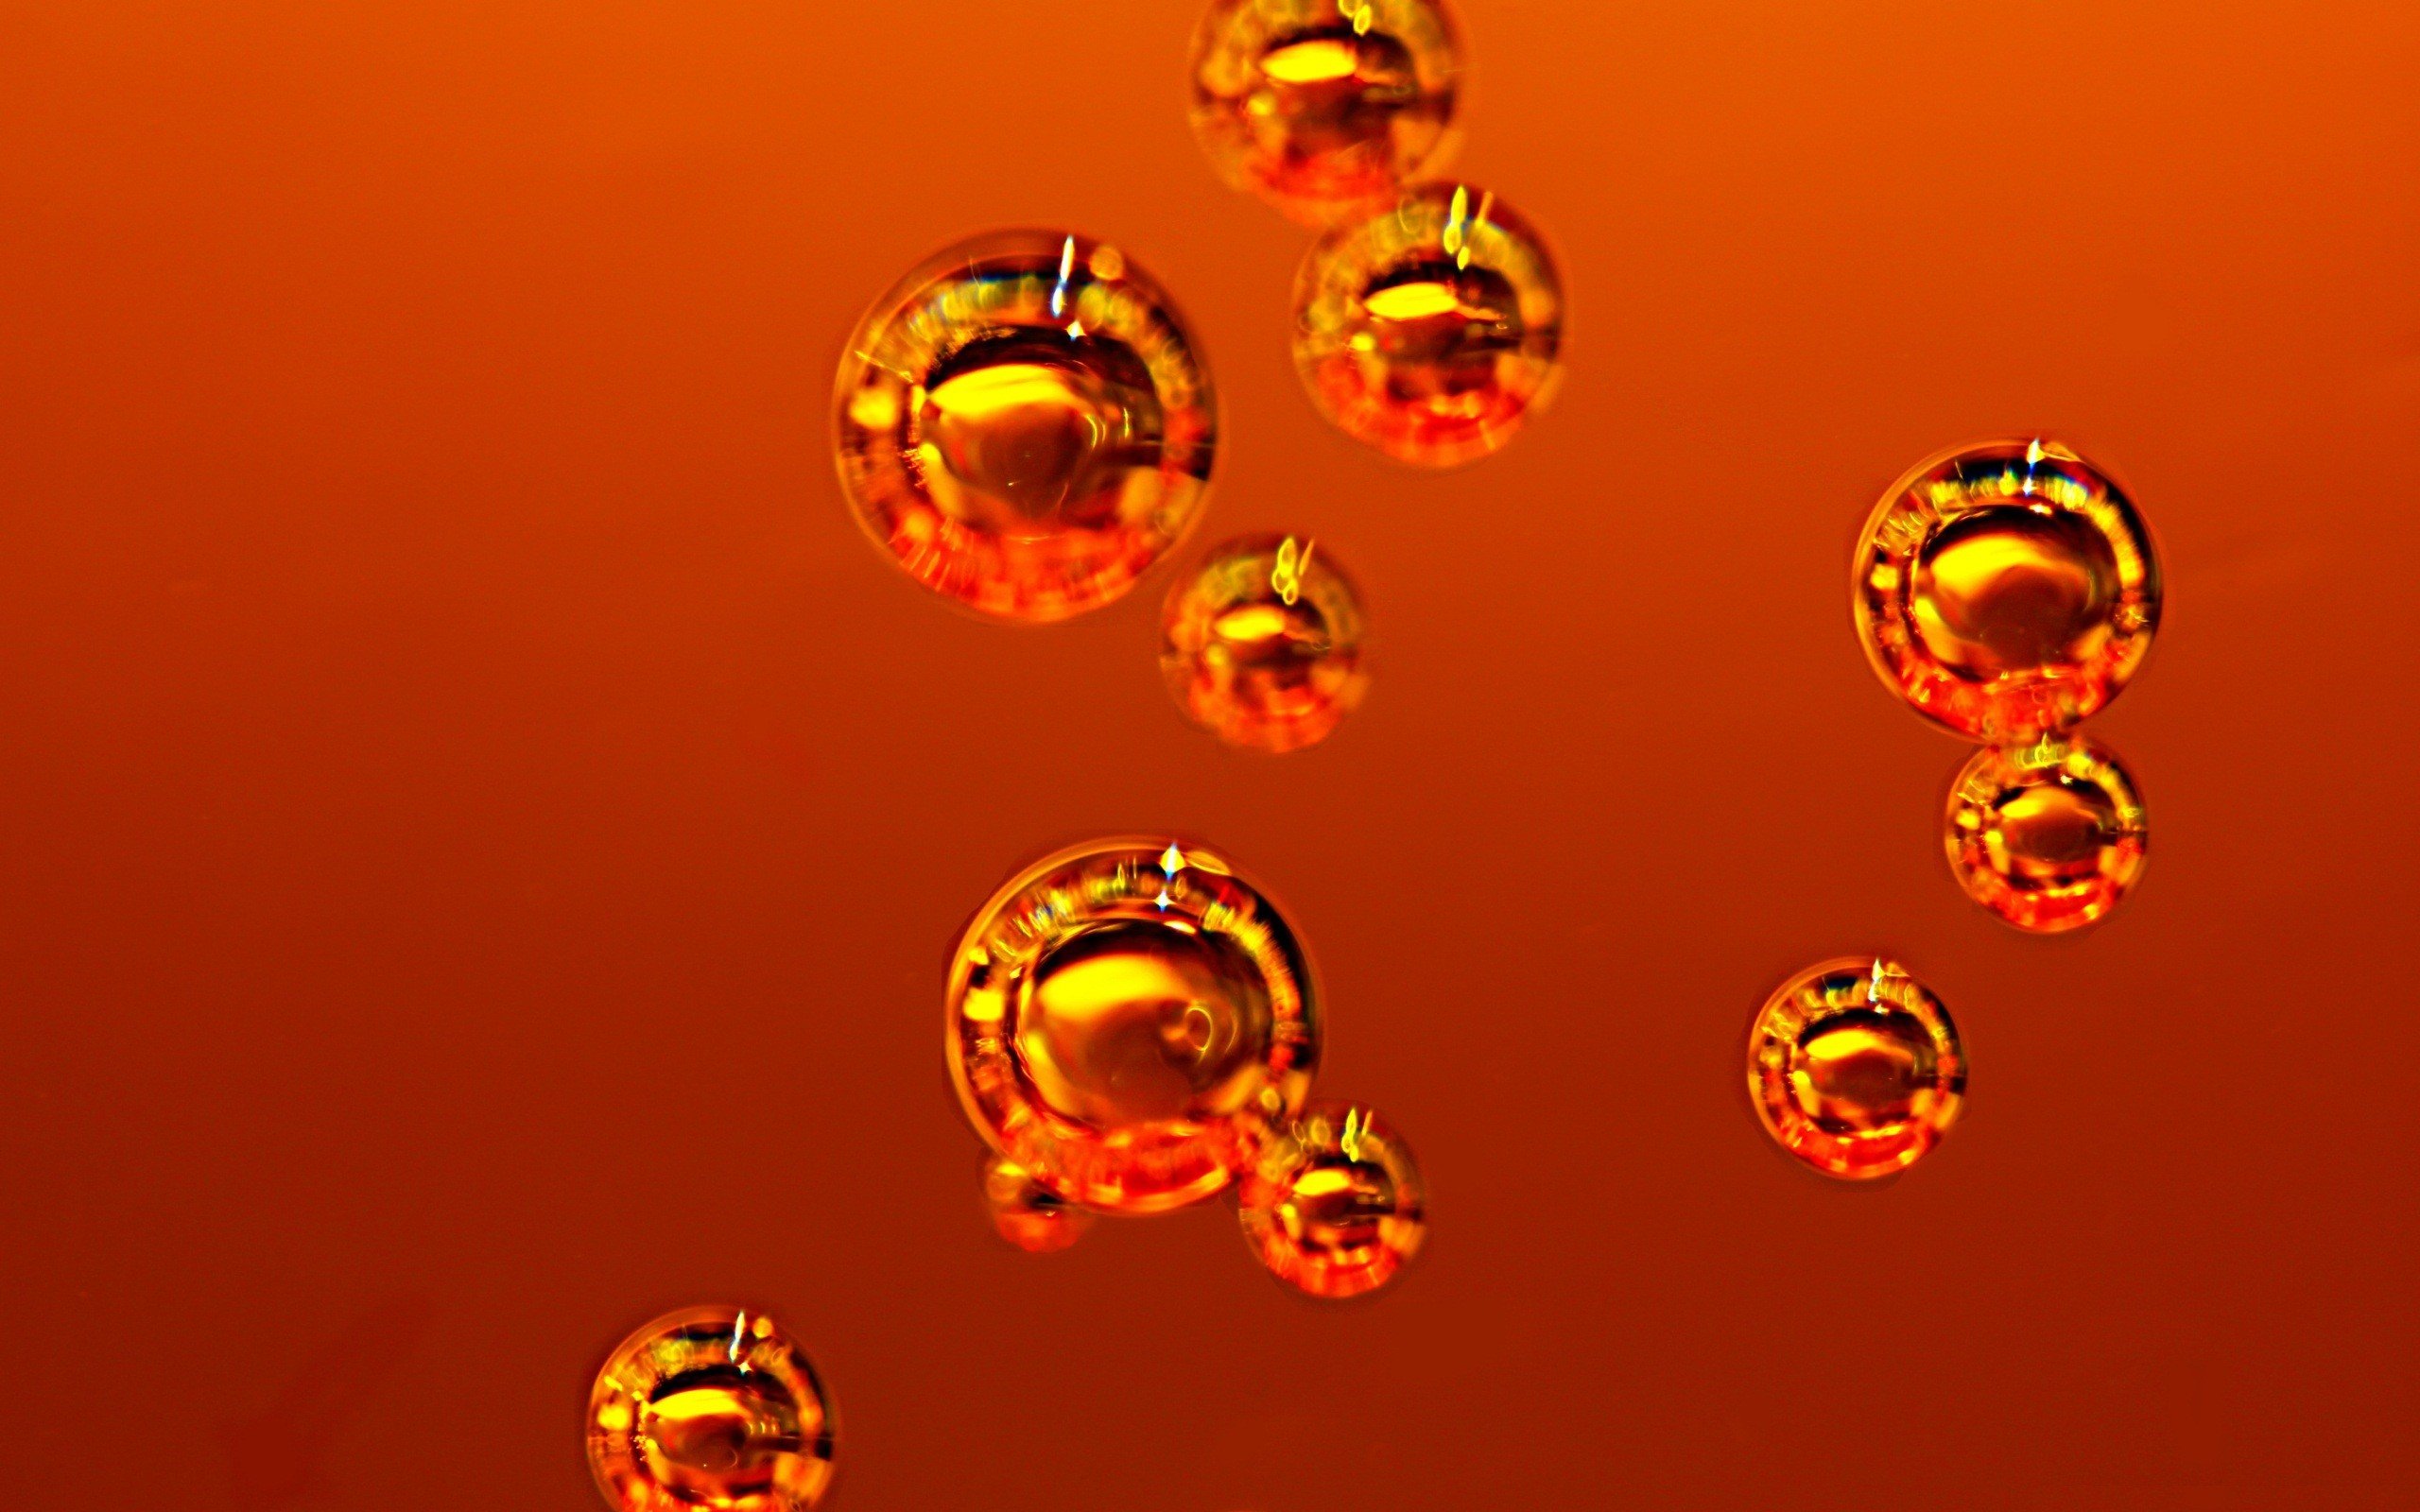 Abstract Orange Wallpaper 2560x1600 Abstract Orange Bubbles Drinks